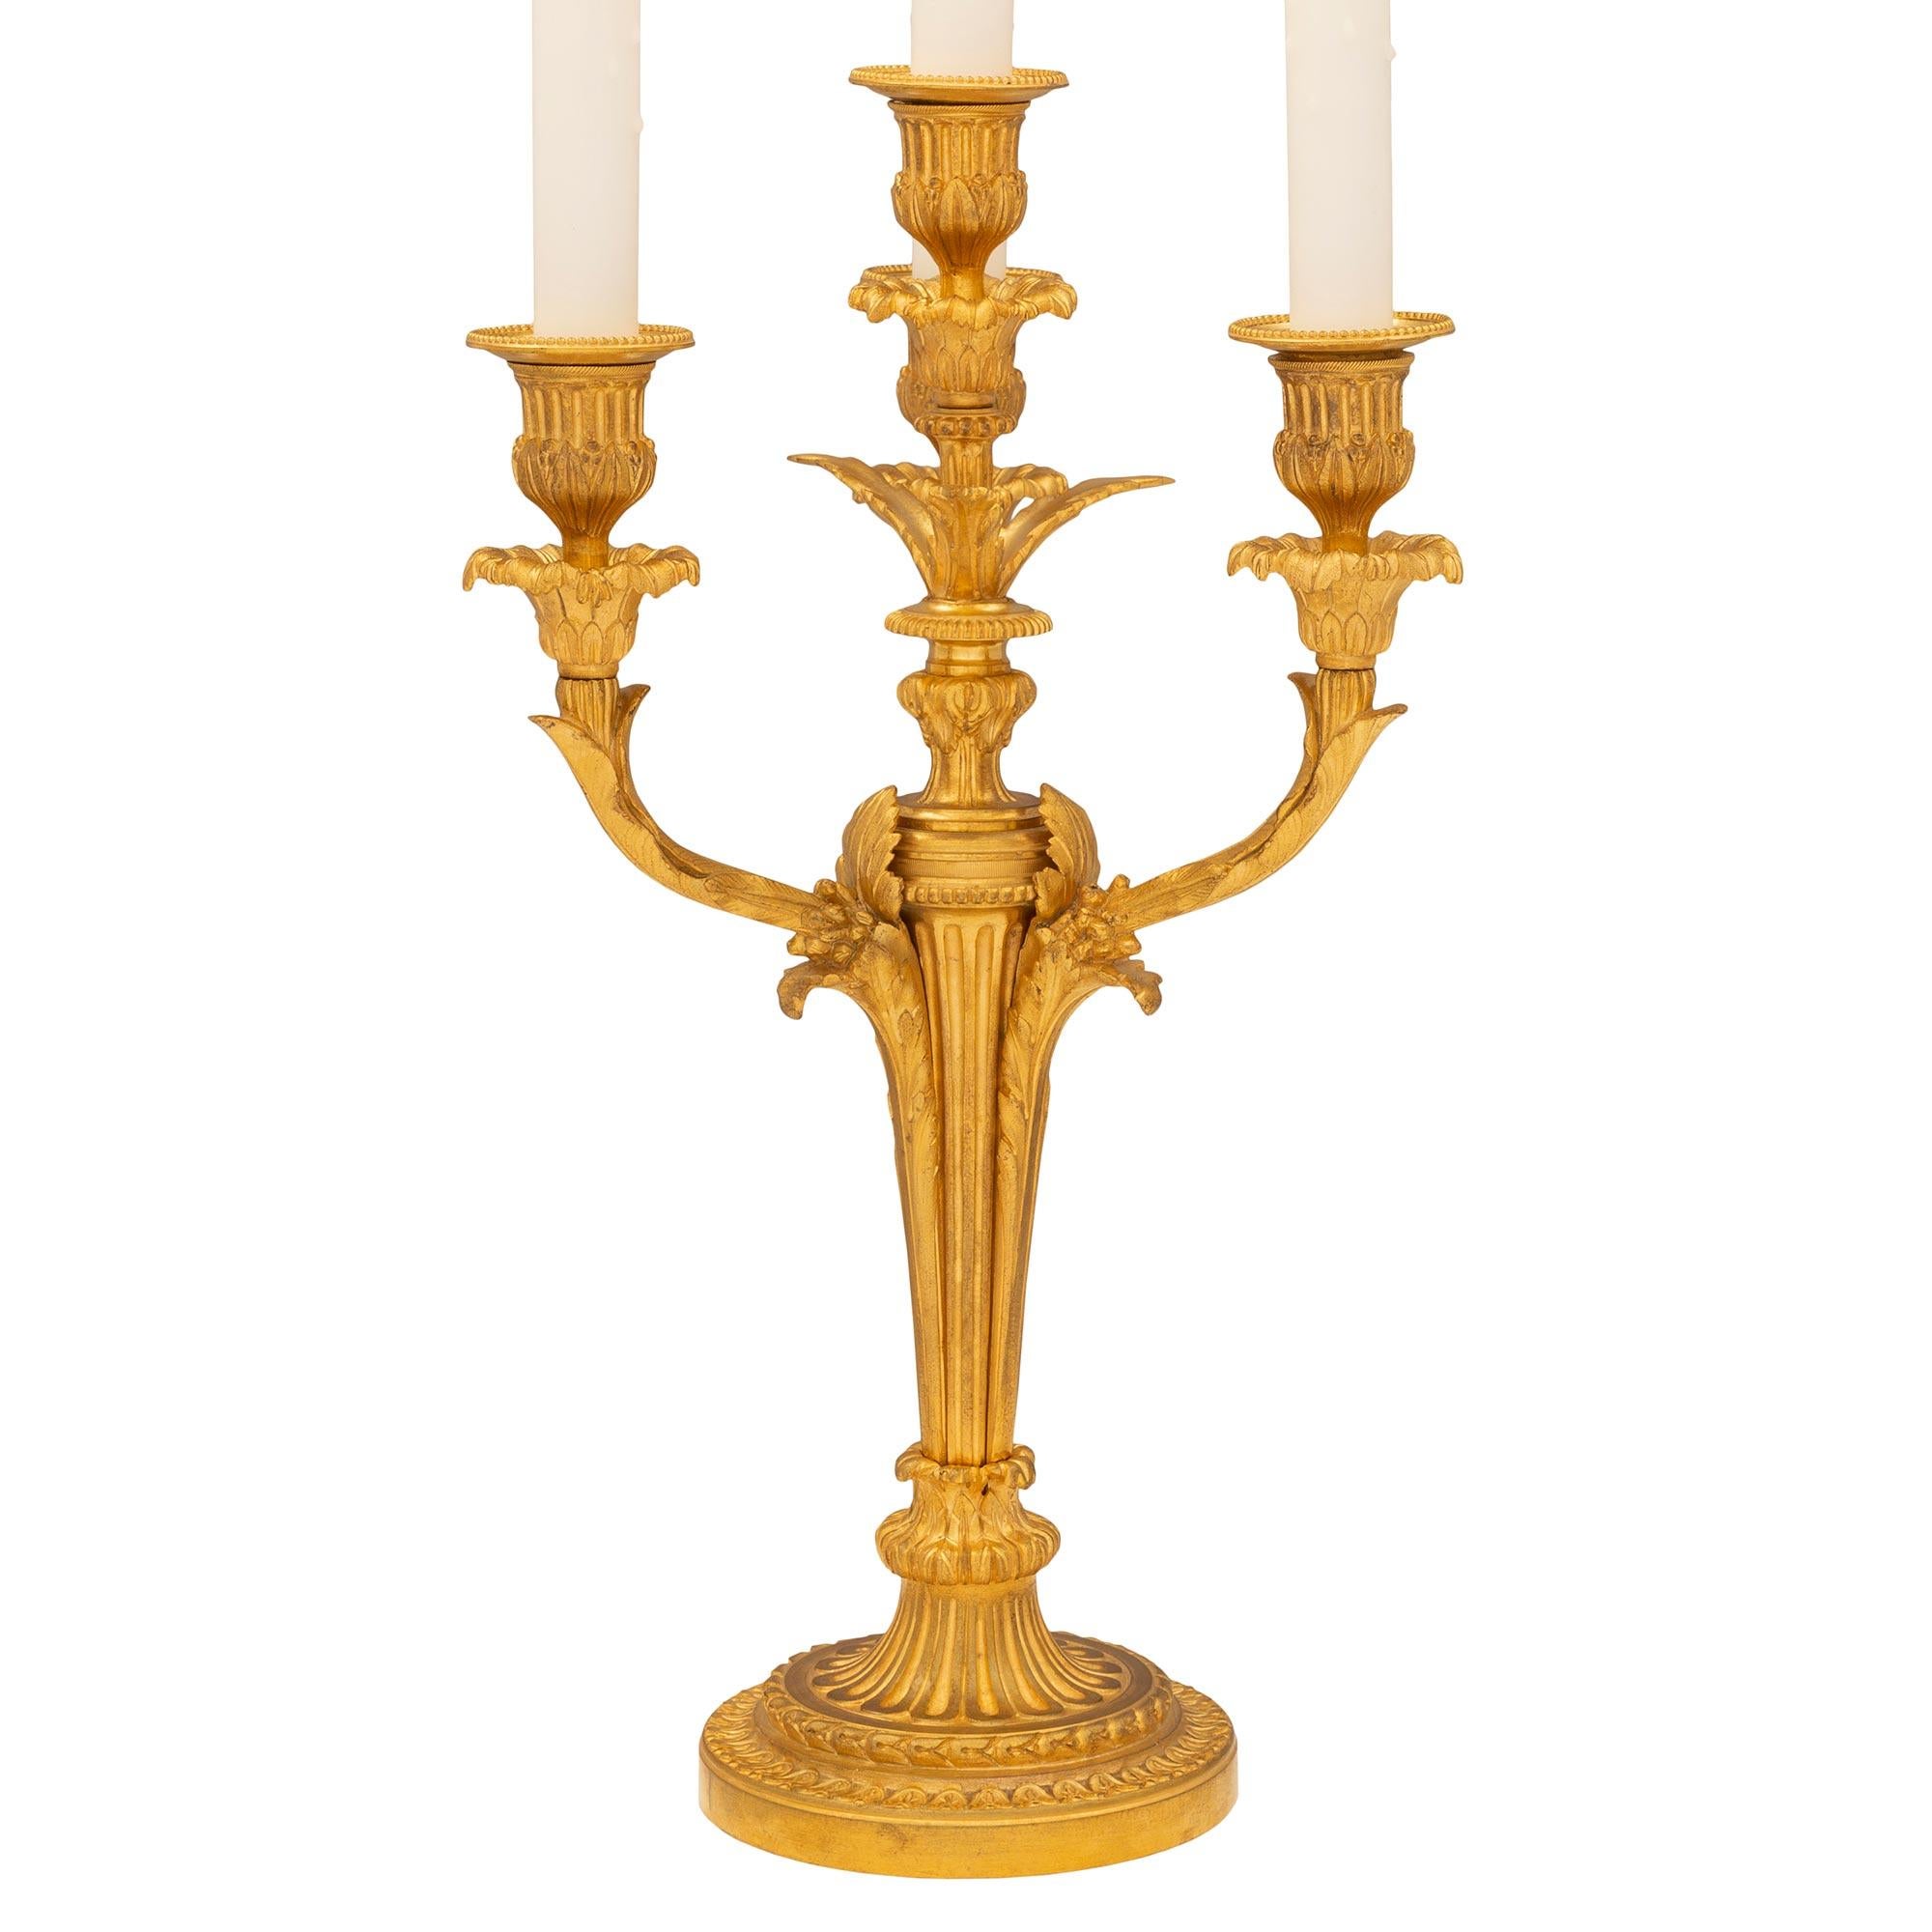 An elegant and high quality pair of French 19th century Louis XVI st. ormolu candelabra lamps. Each four arm lamp is raised by a beautiful mottled circular base with lovely wrap around Coeur de Rai and laurel bands below a striking fluted design in